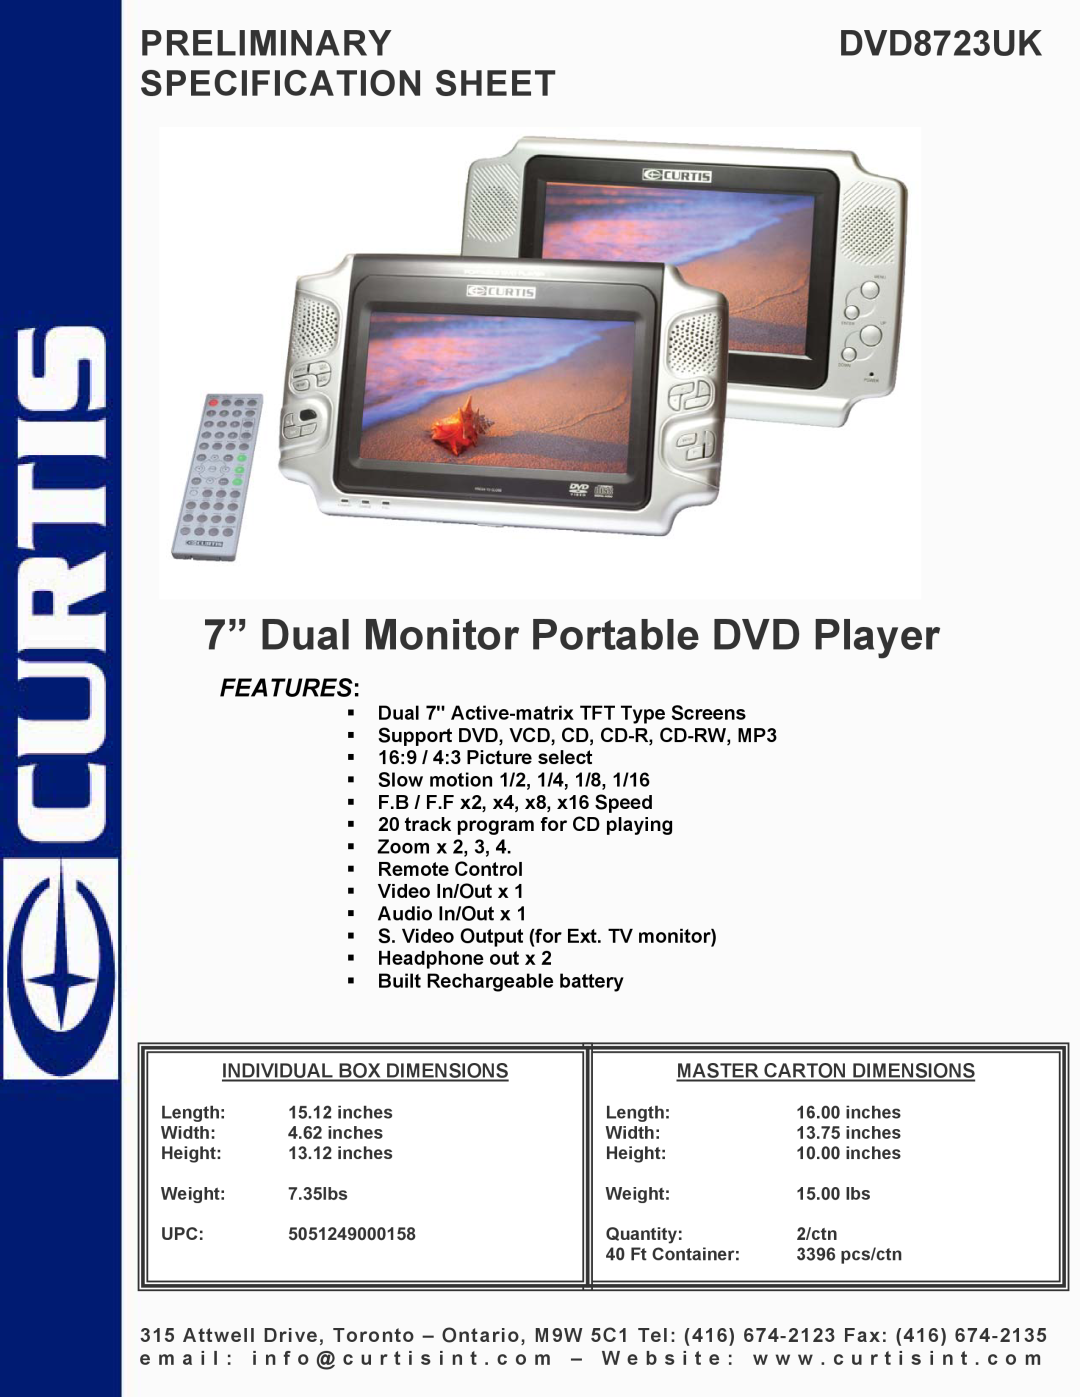 Curtis specifications 7” Dual Monitor Portable DVD Player, PRELIMINARYDVD8723UK SPECIFICATION SHEET, Features 